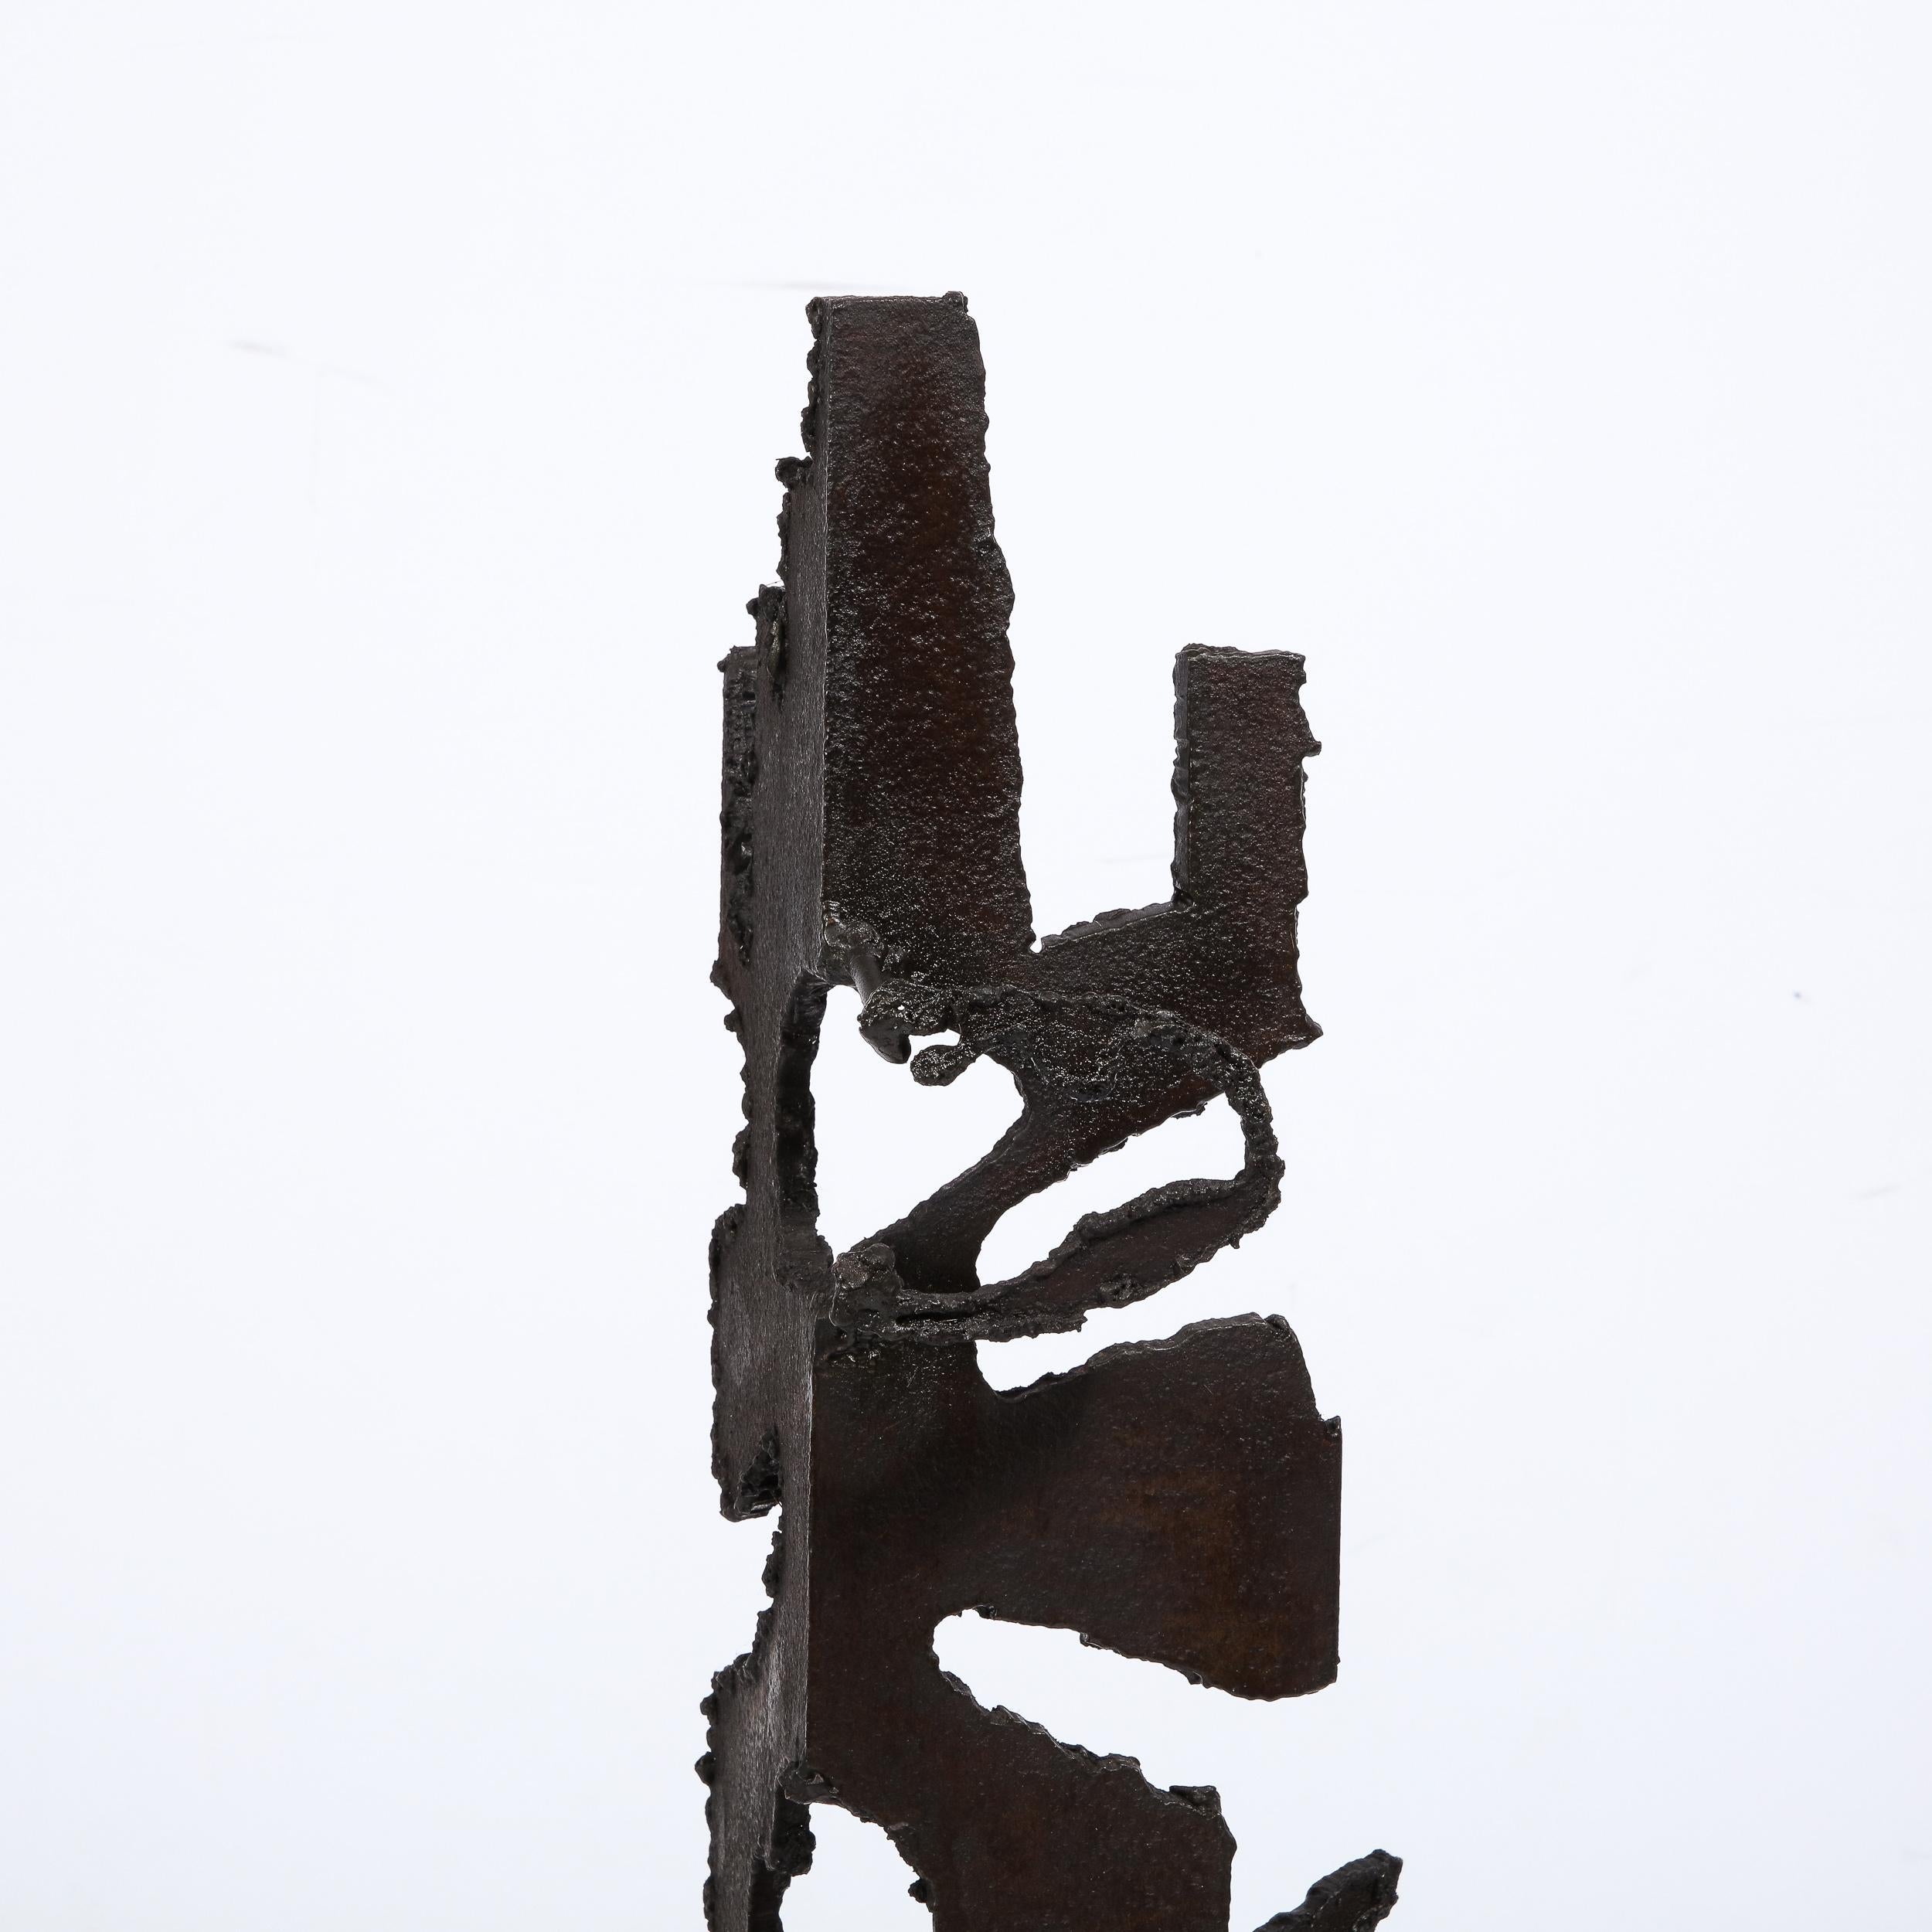 Brutalist Steel Sculpture in Oil and Waxed Finish by Jan Van Deckter For Sale 1